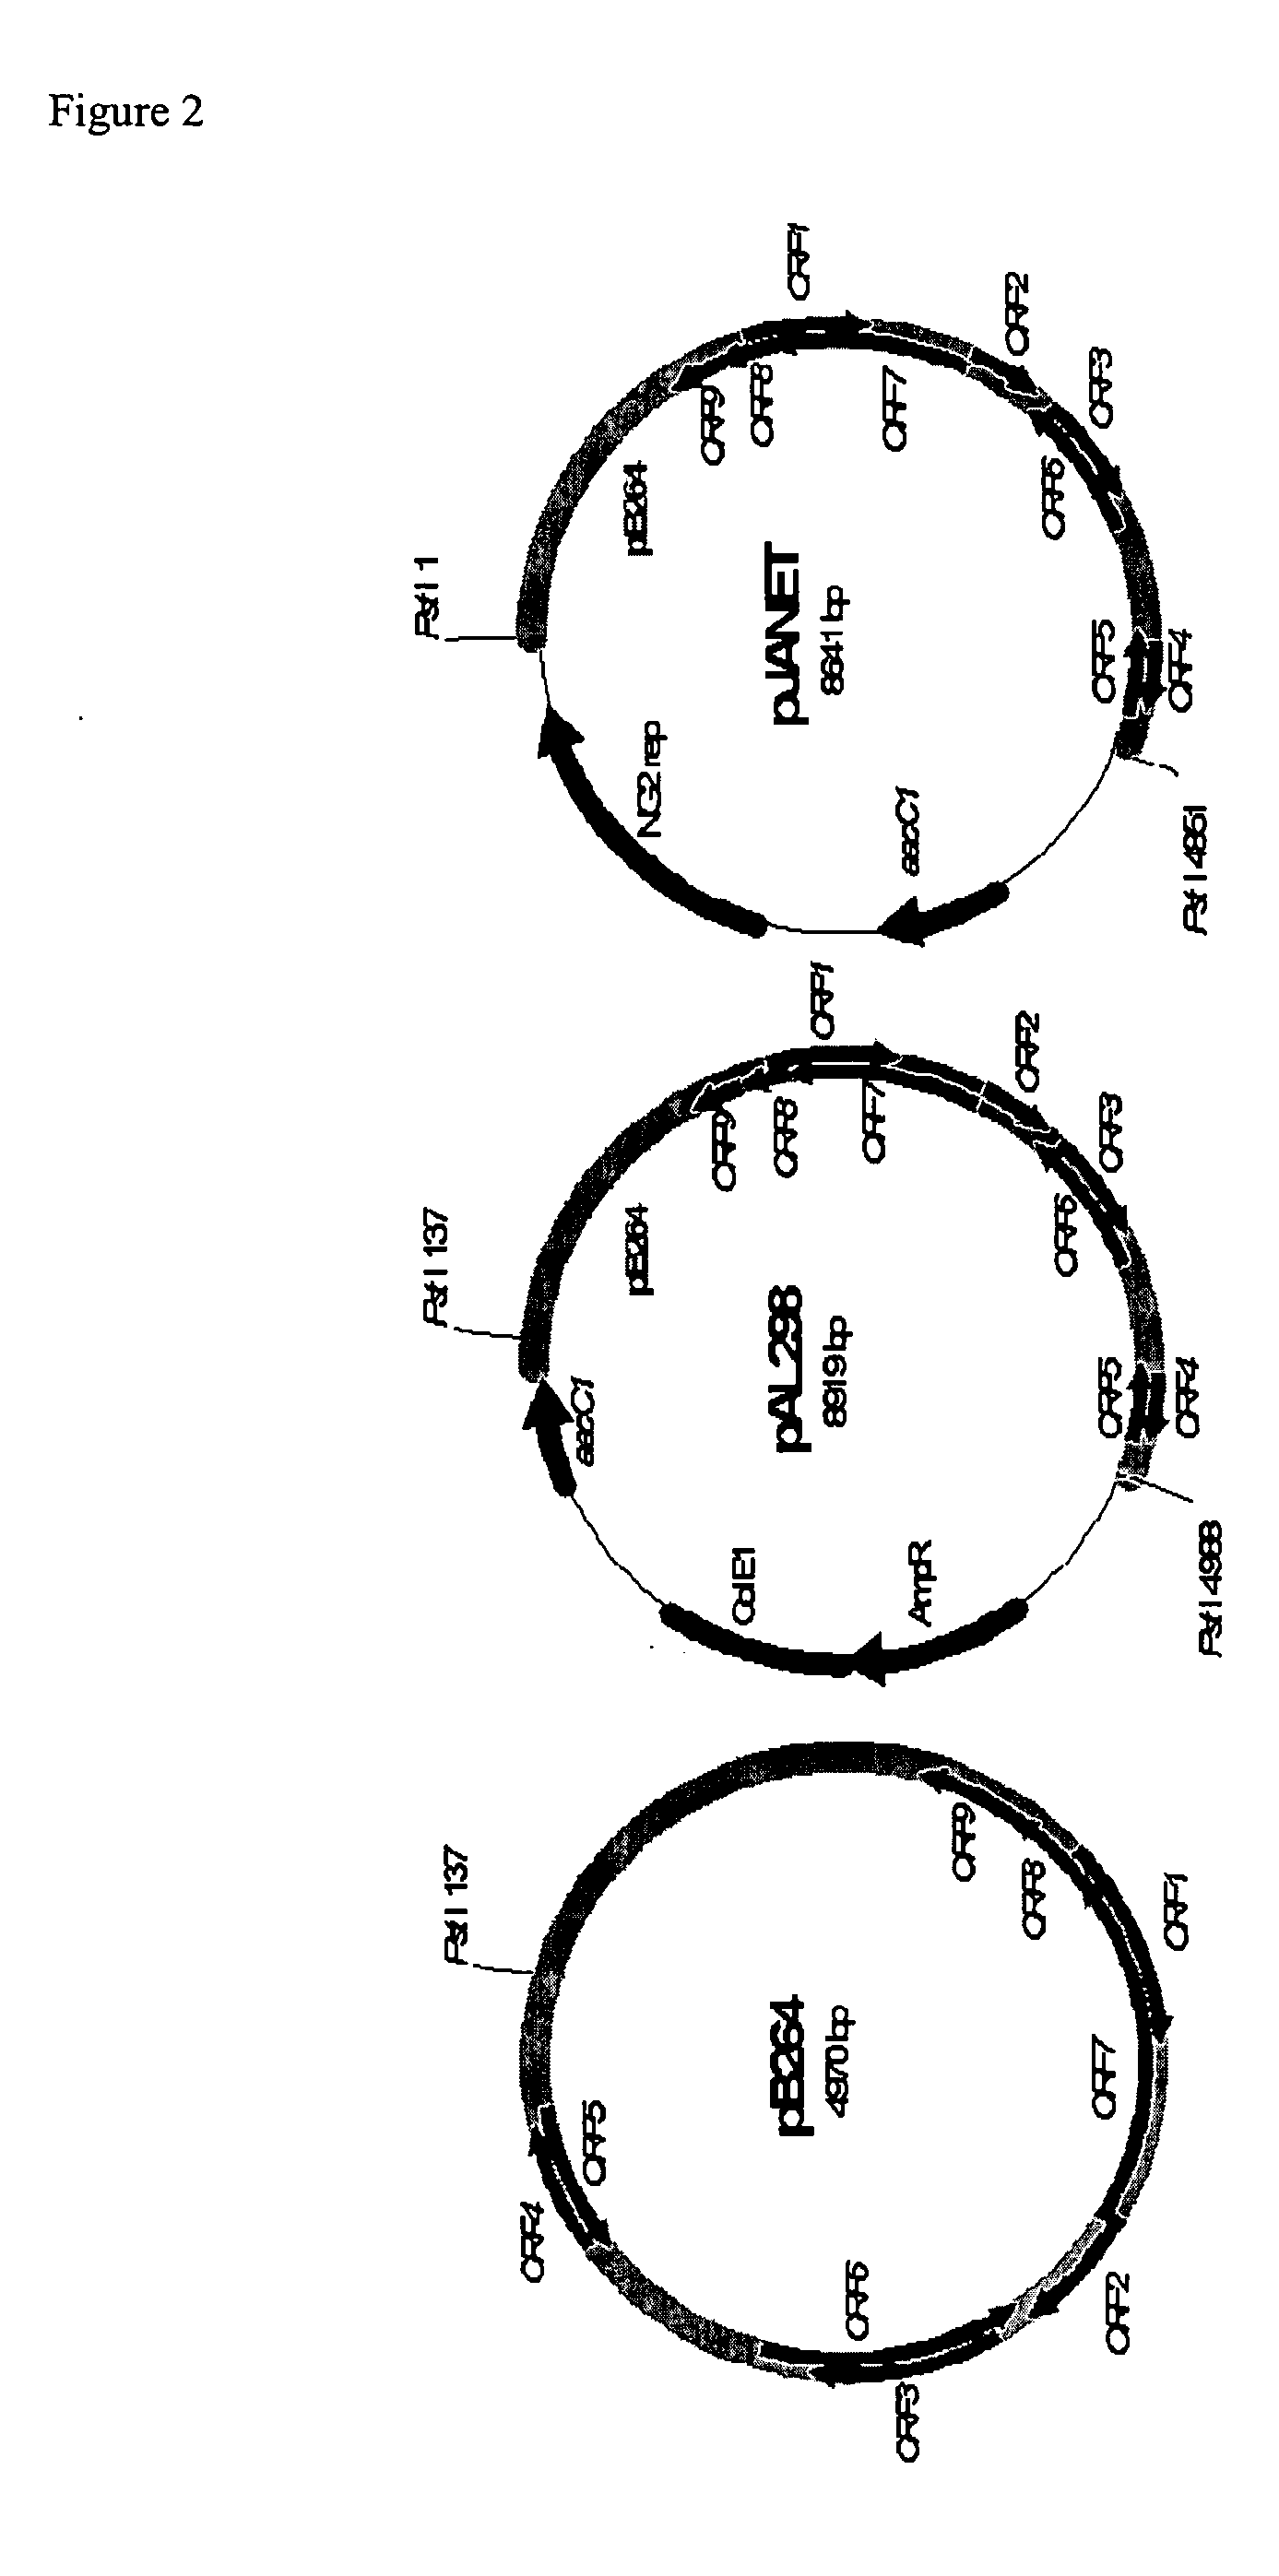 Novel compositions and methods for genetic manipulation of Rhodococcus bacteria